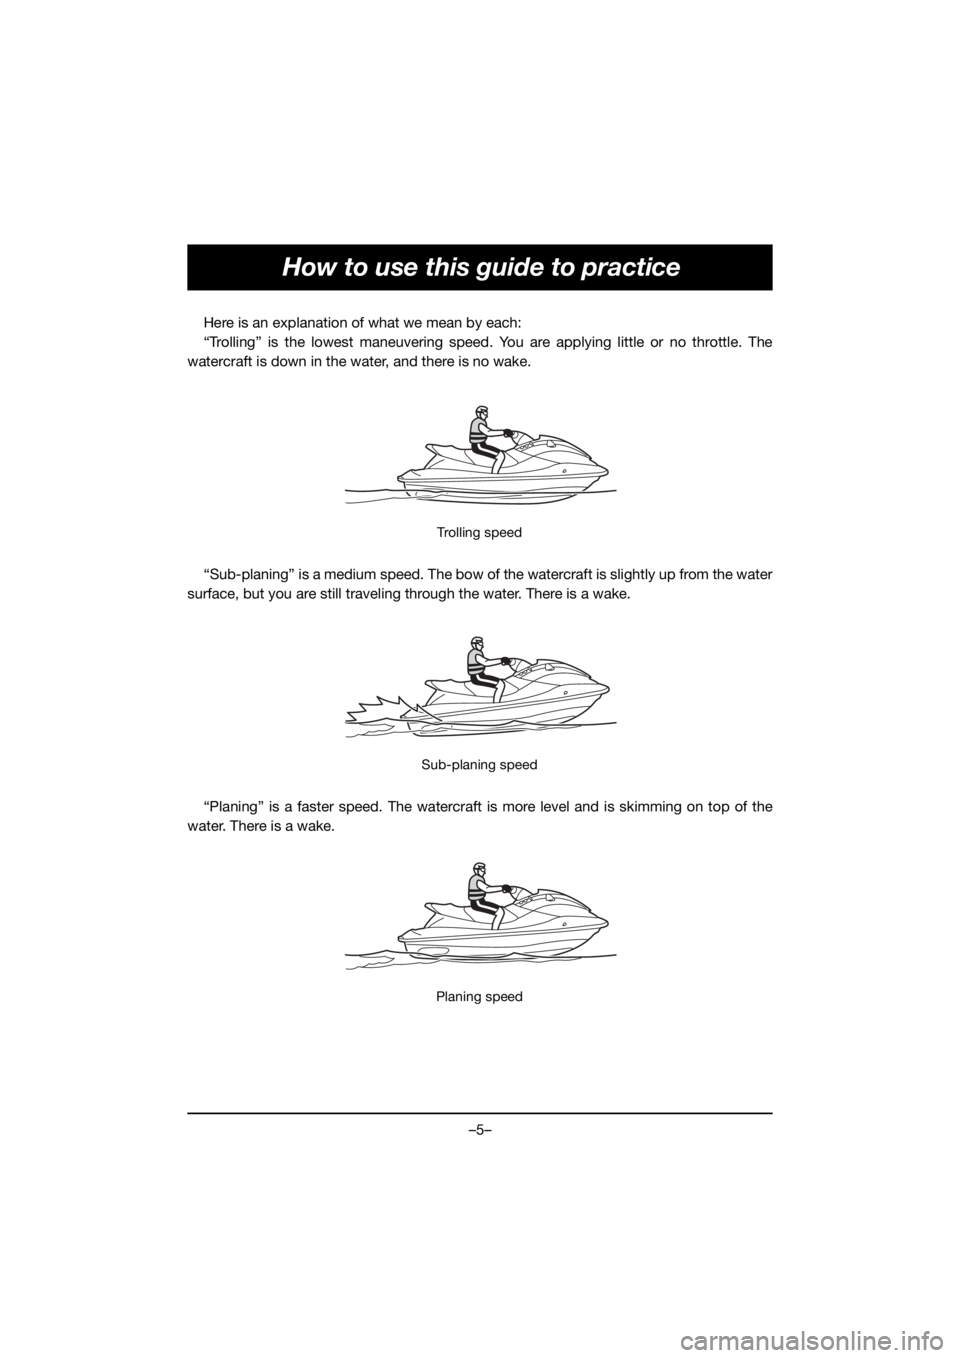 YAMAHA EX 2021  Manuale duso (in Italian) –5–
How to use this guide to practice
Here is an explanation of what we mean by each:
“Trolling” is the lowest maneuvering speed. You are applying little or no throttle. The
watercraft is down